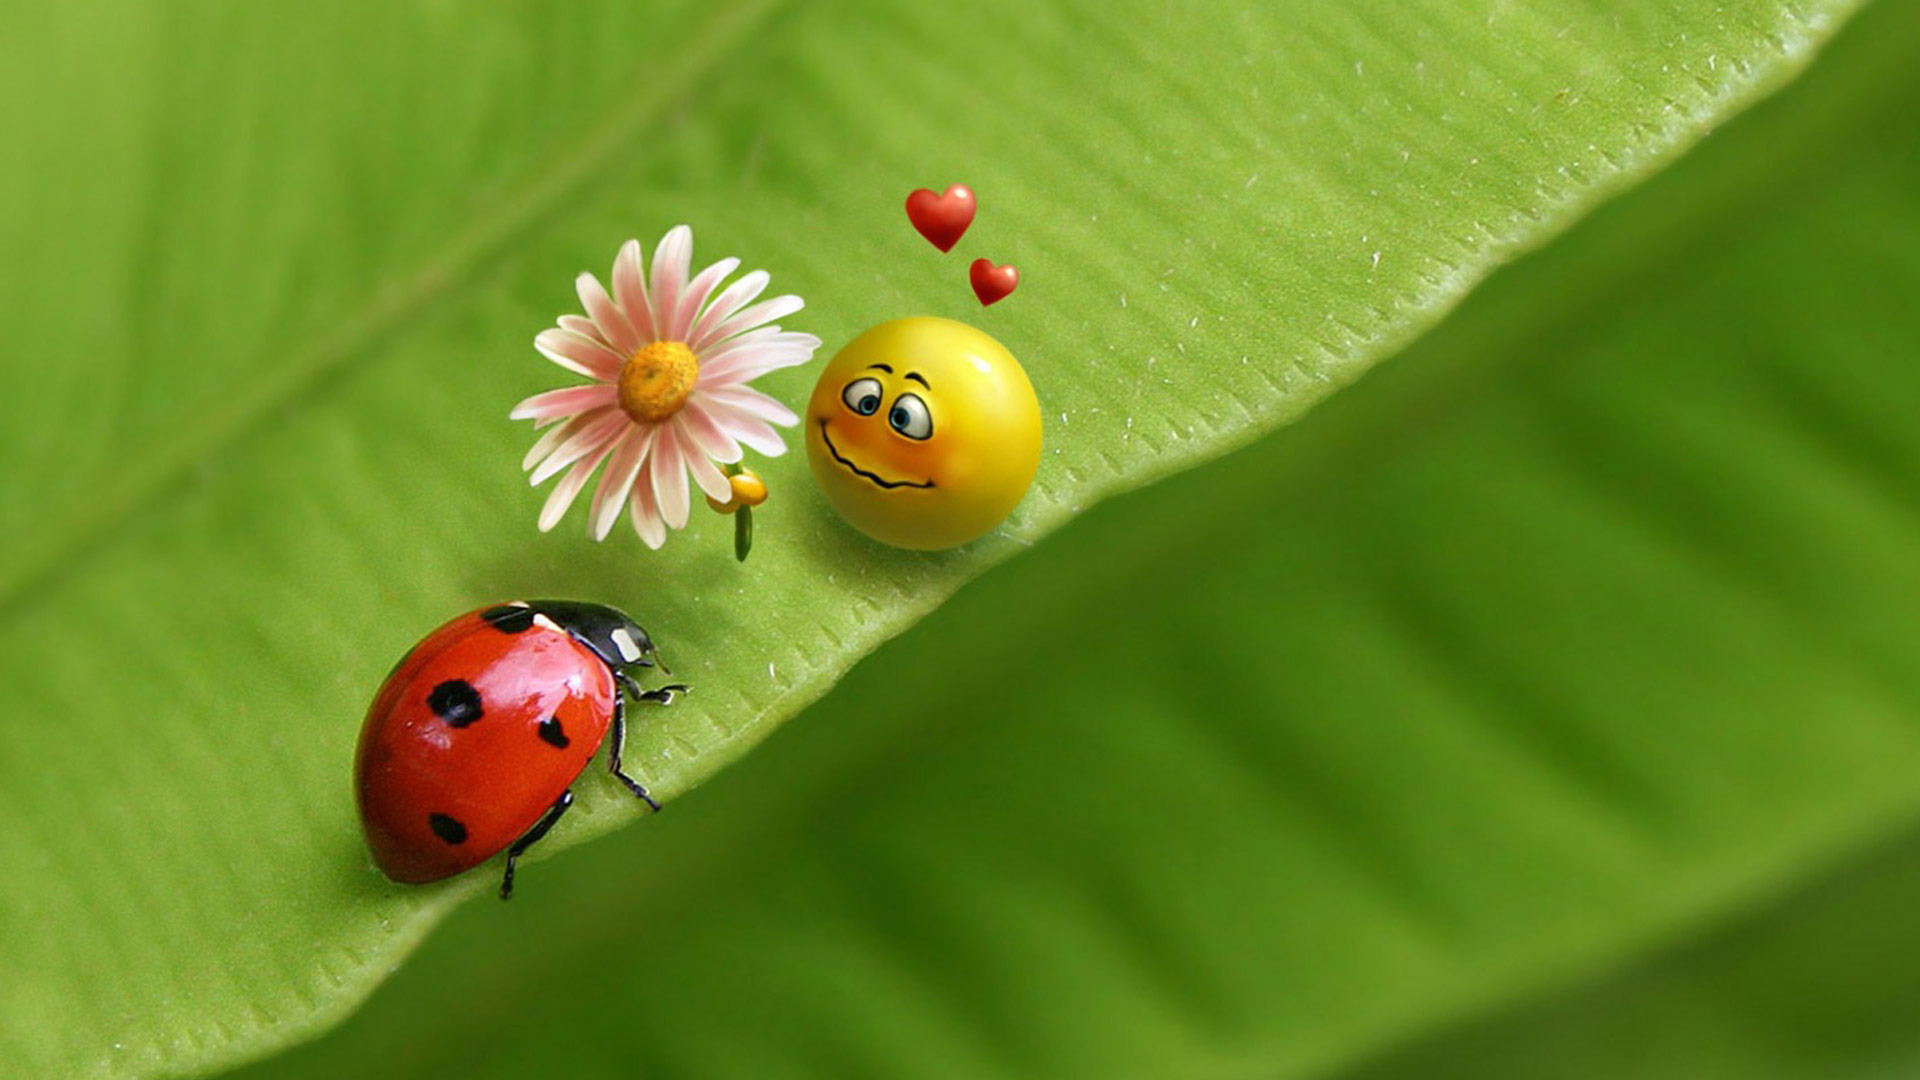 Ladybug and Smiley face in love Wallpaper   MixHD wallpapers